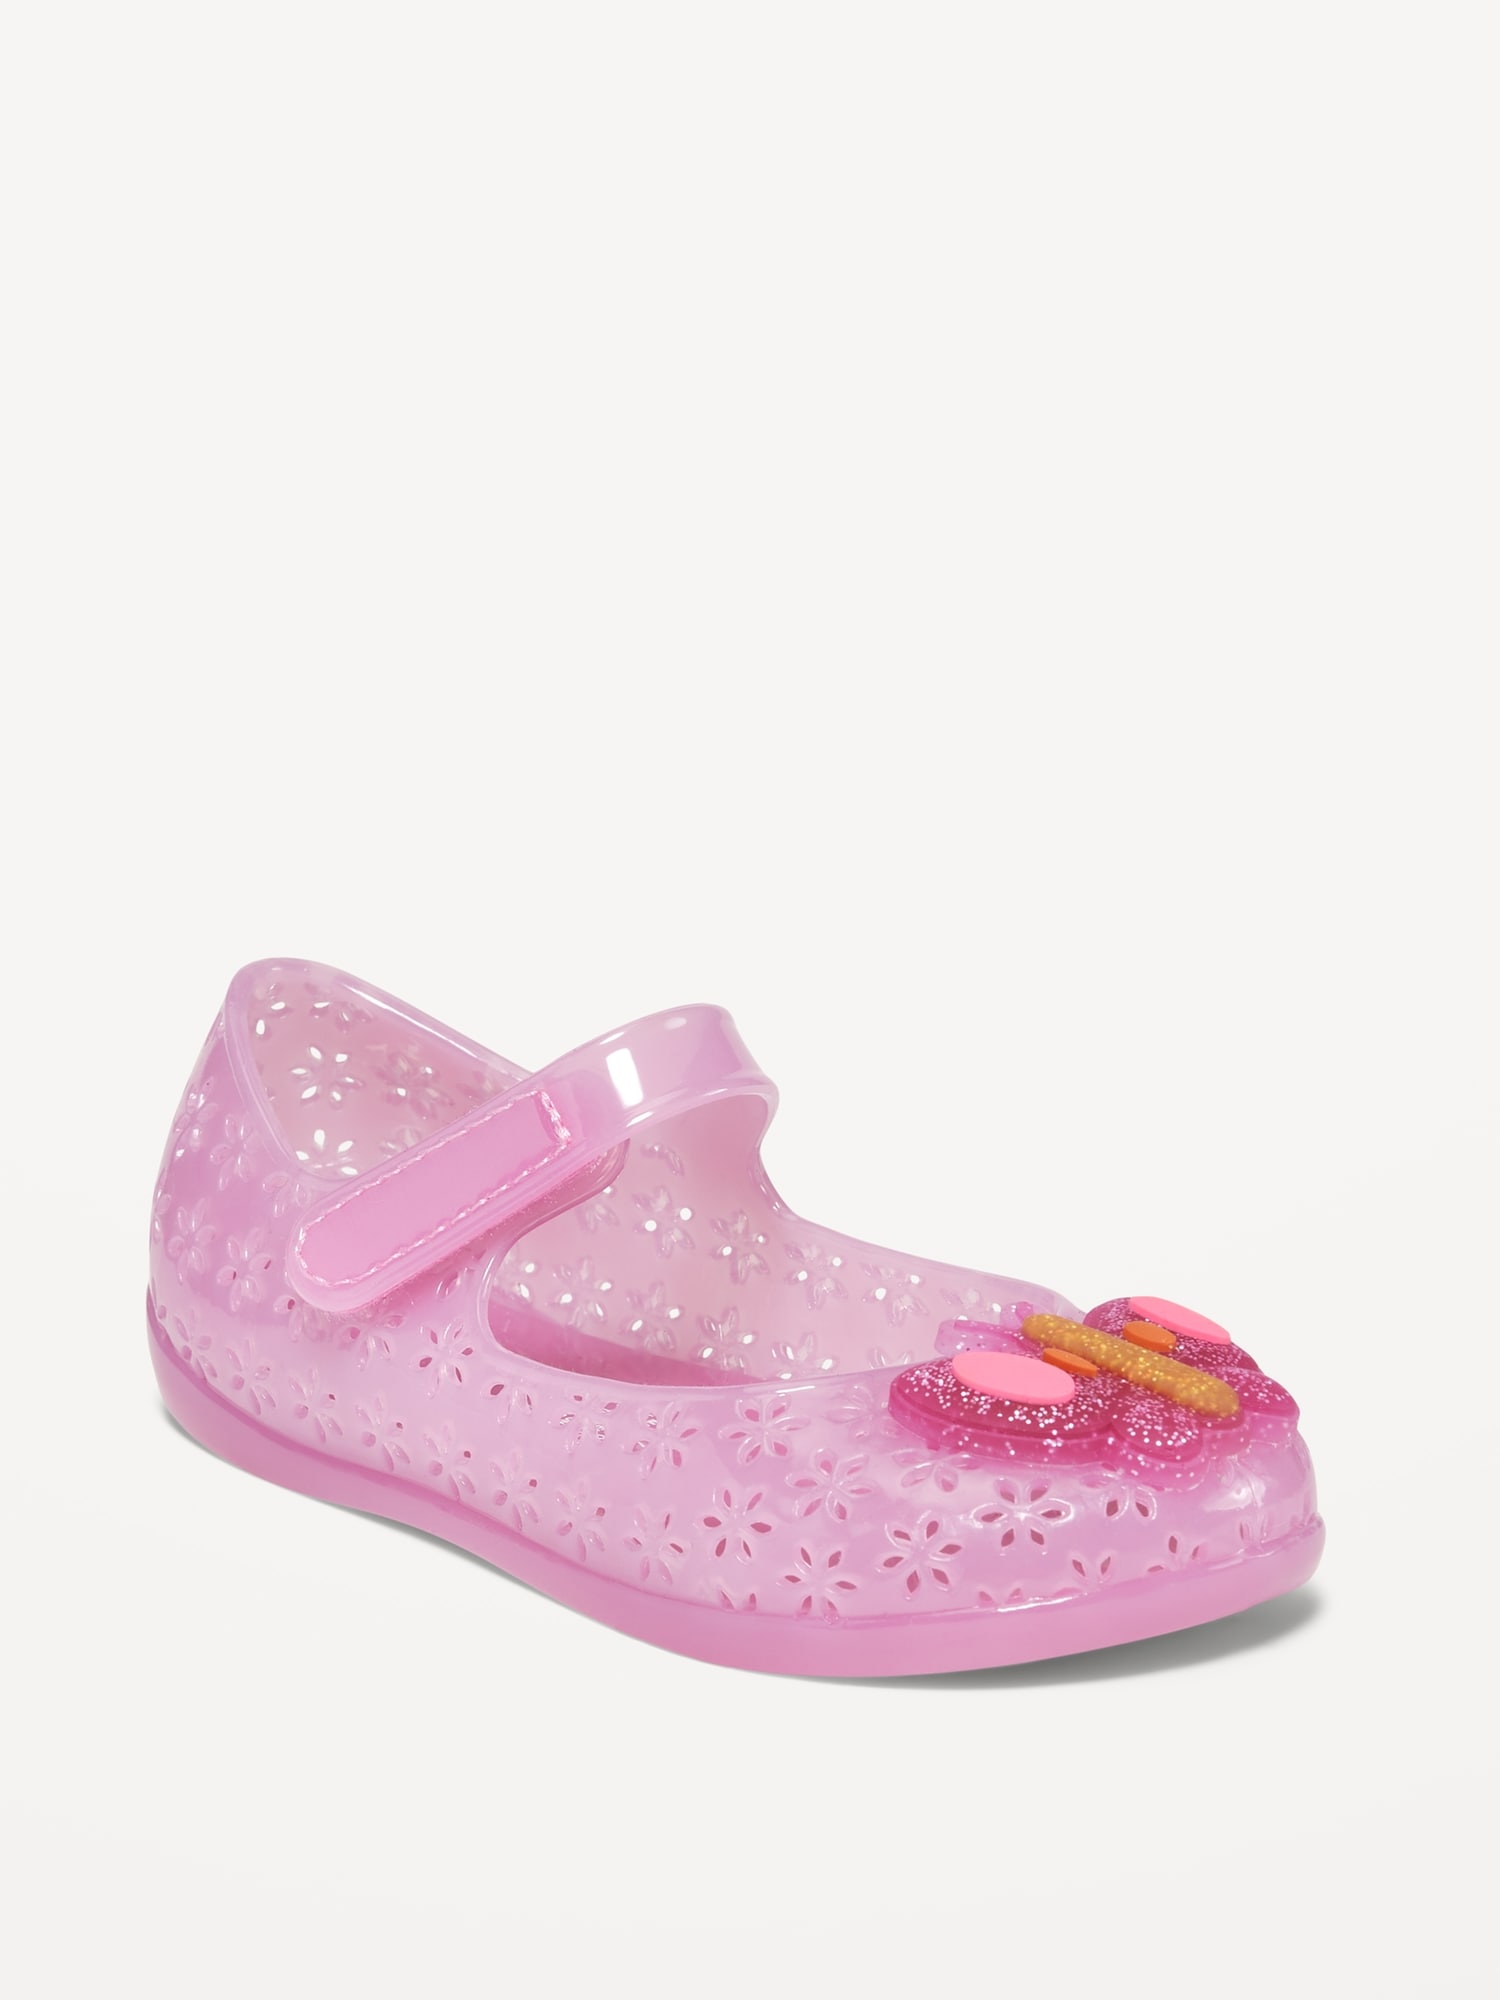 Floral-Cutout Jelly Mary-Jane Flats for Toddler Girls | Old Navy